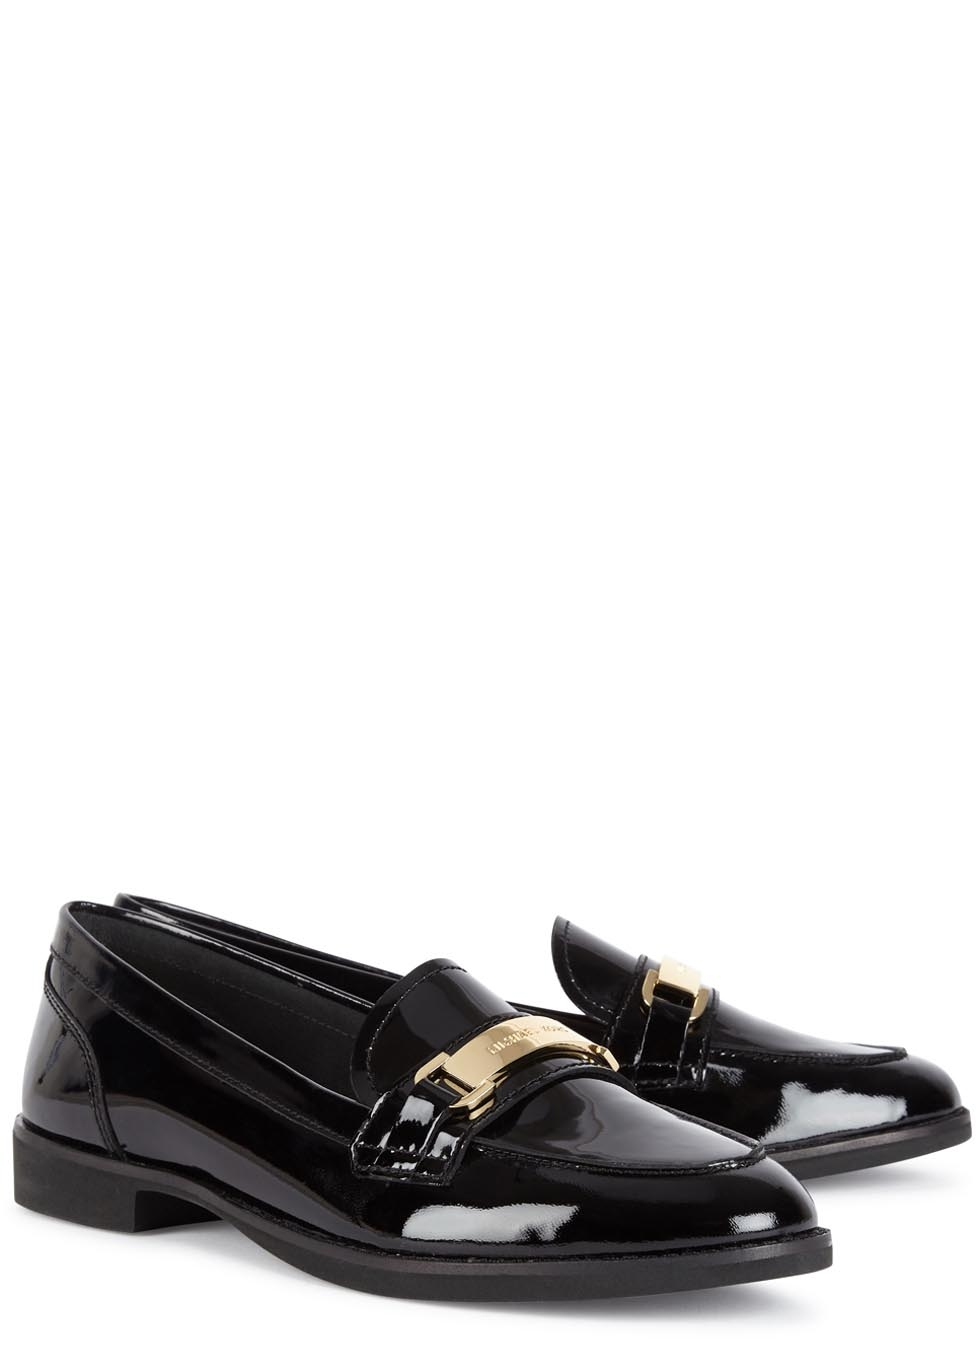 Michael Kors Ansley Black Patent Leather Loafers - Lyst